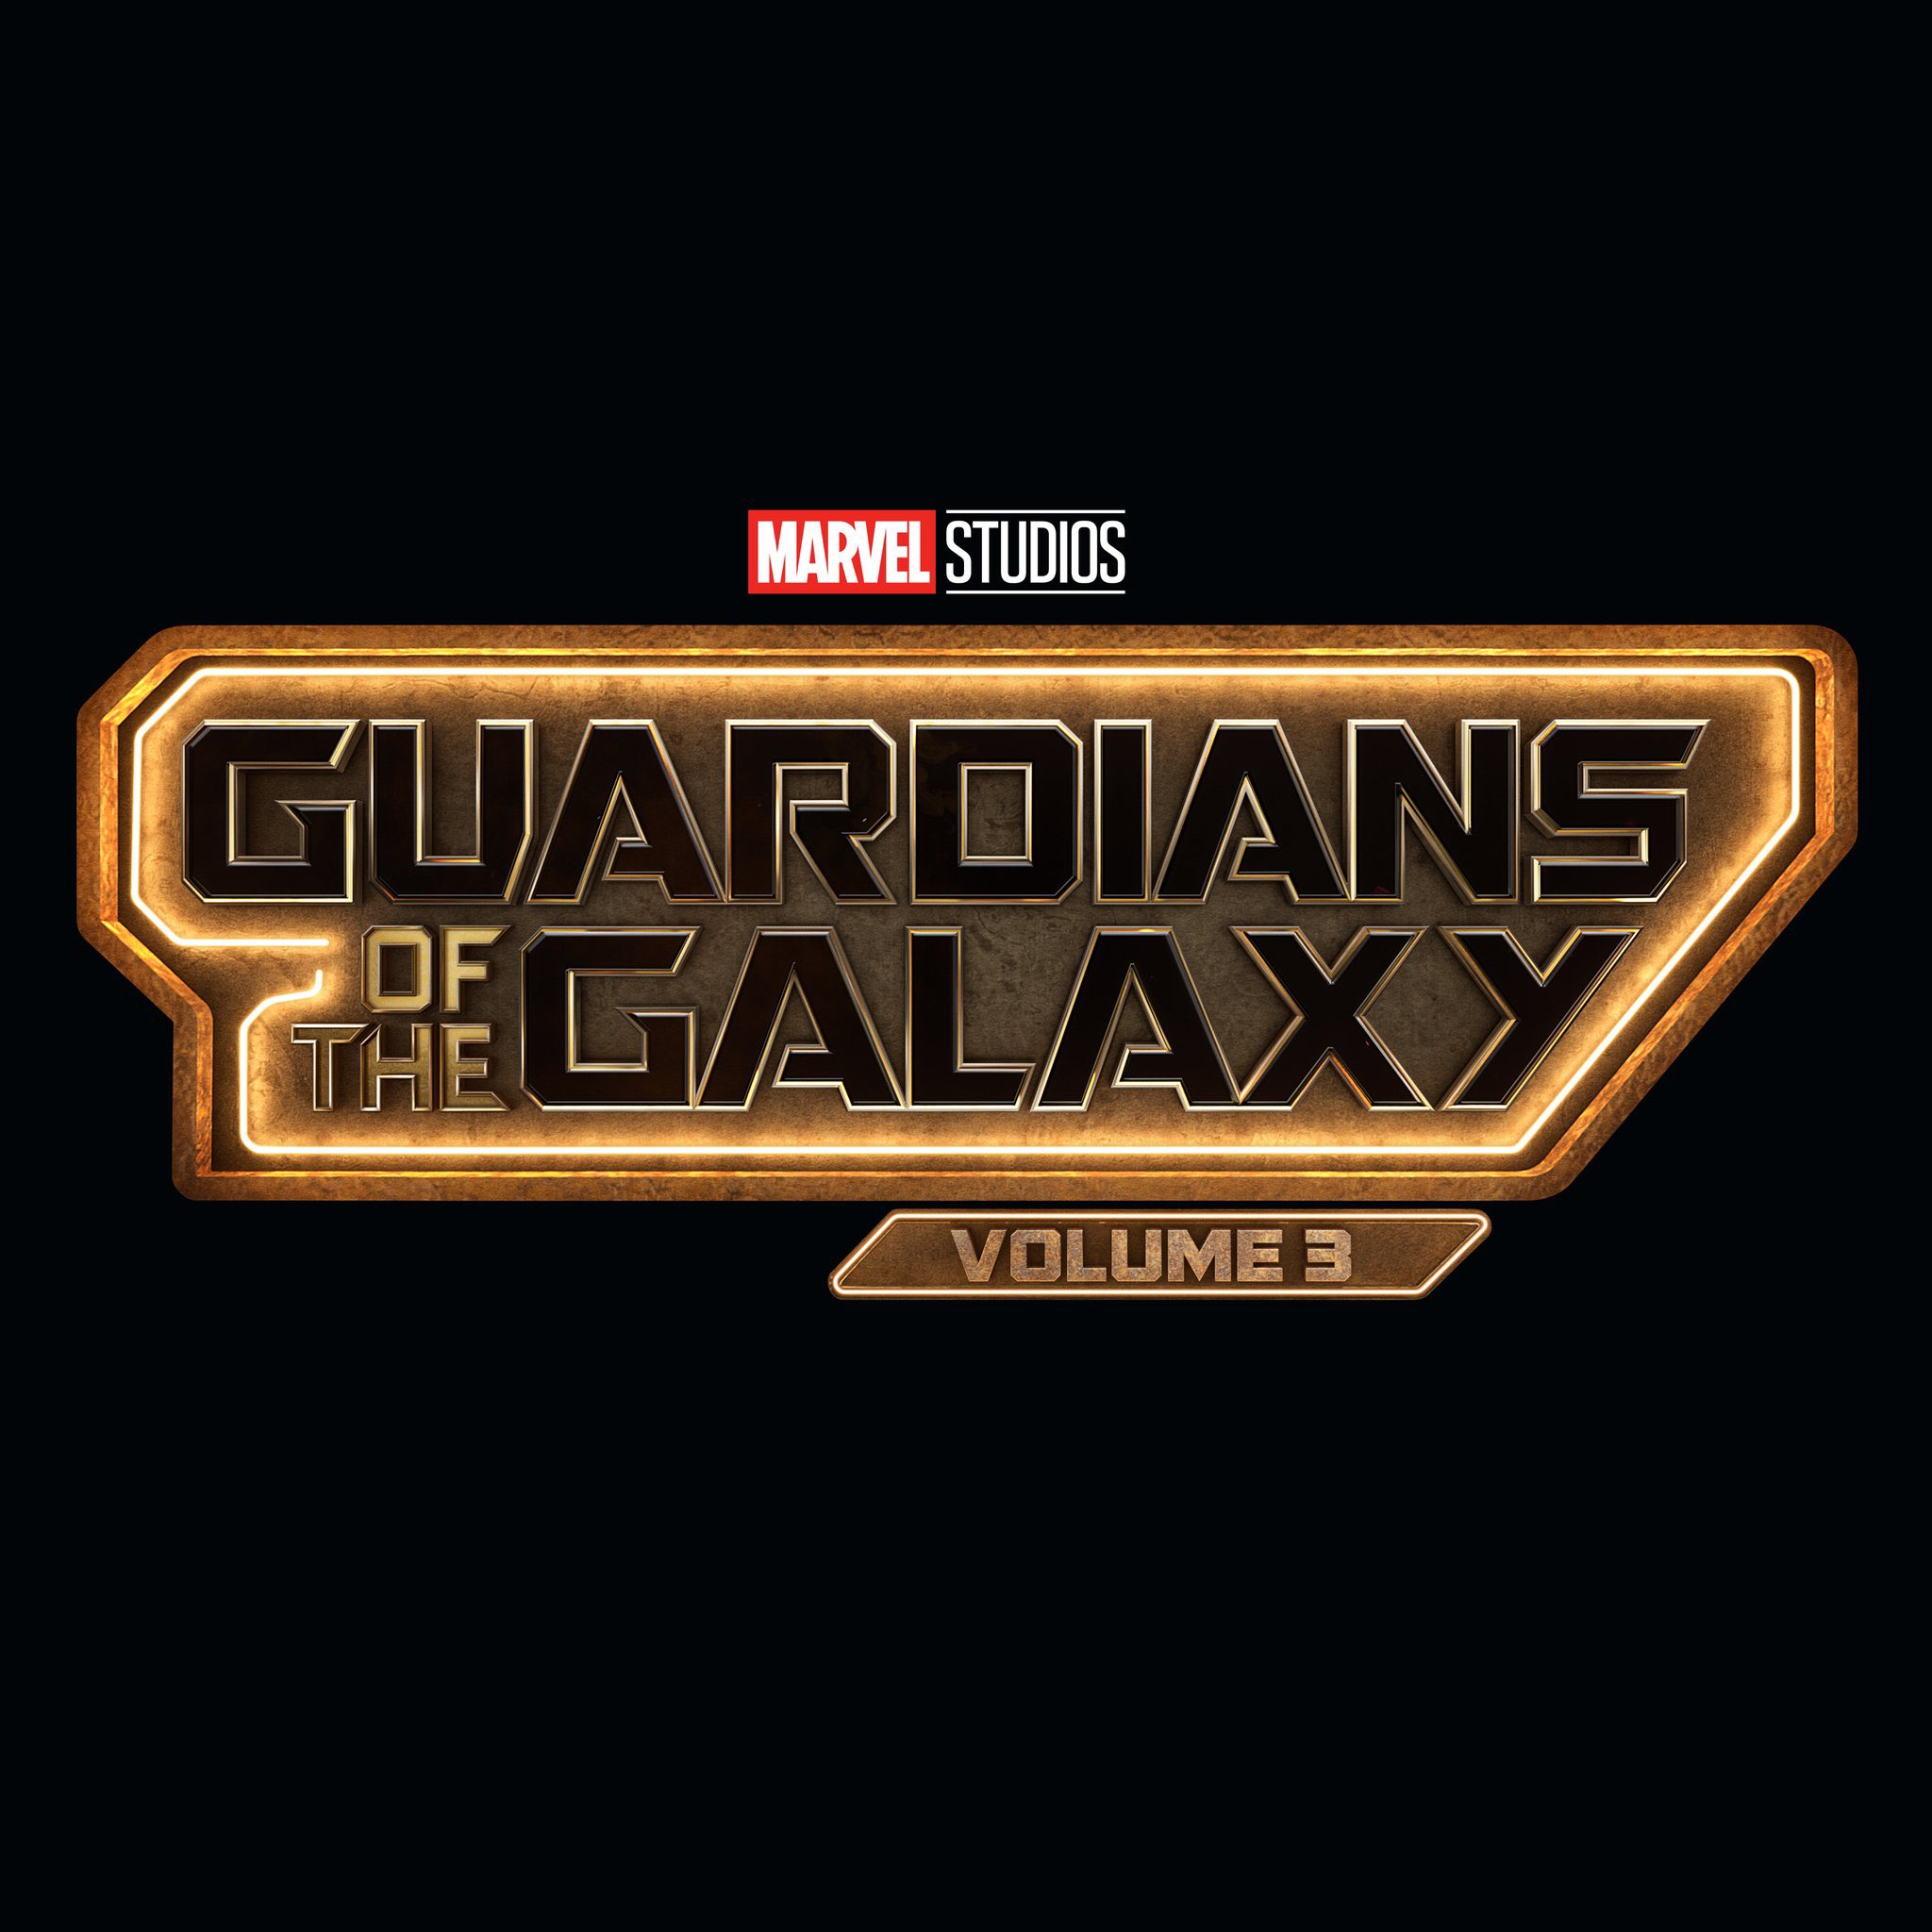 https://static.wikia.nocookie.net/marvelcinematicuniverse/images/1/13/Logo_for_Guardians_of_the_Galaxy_Volume_3.jpg/revision/latest?cb=20220724035716